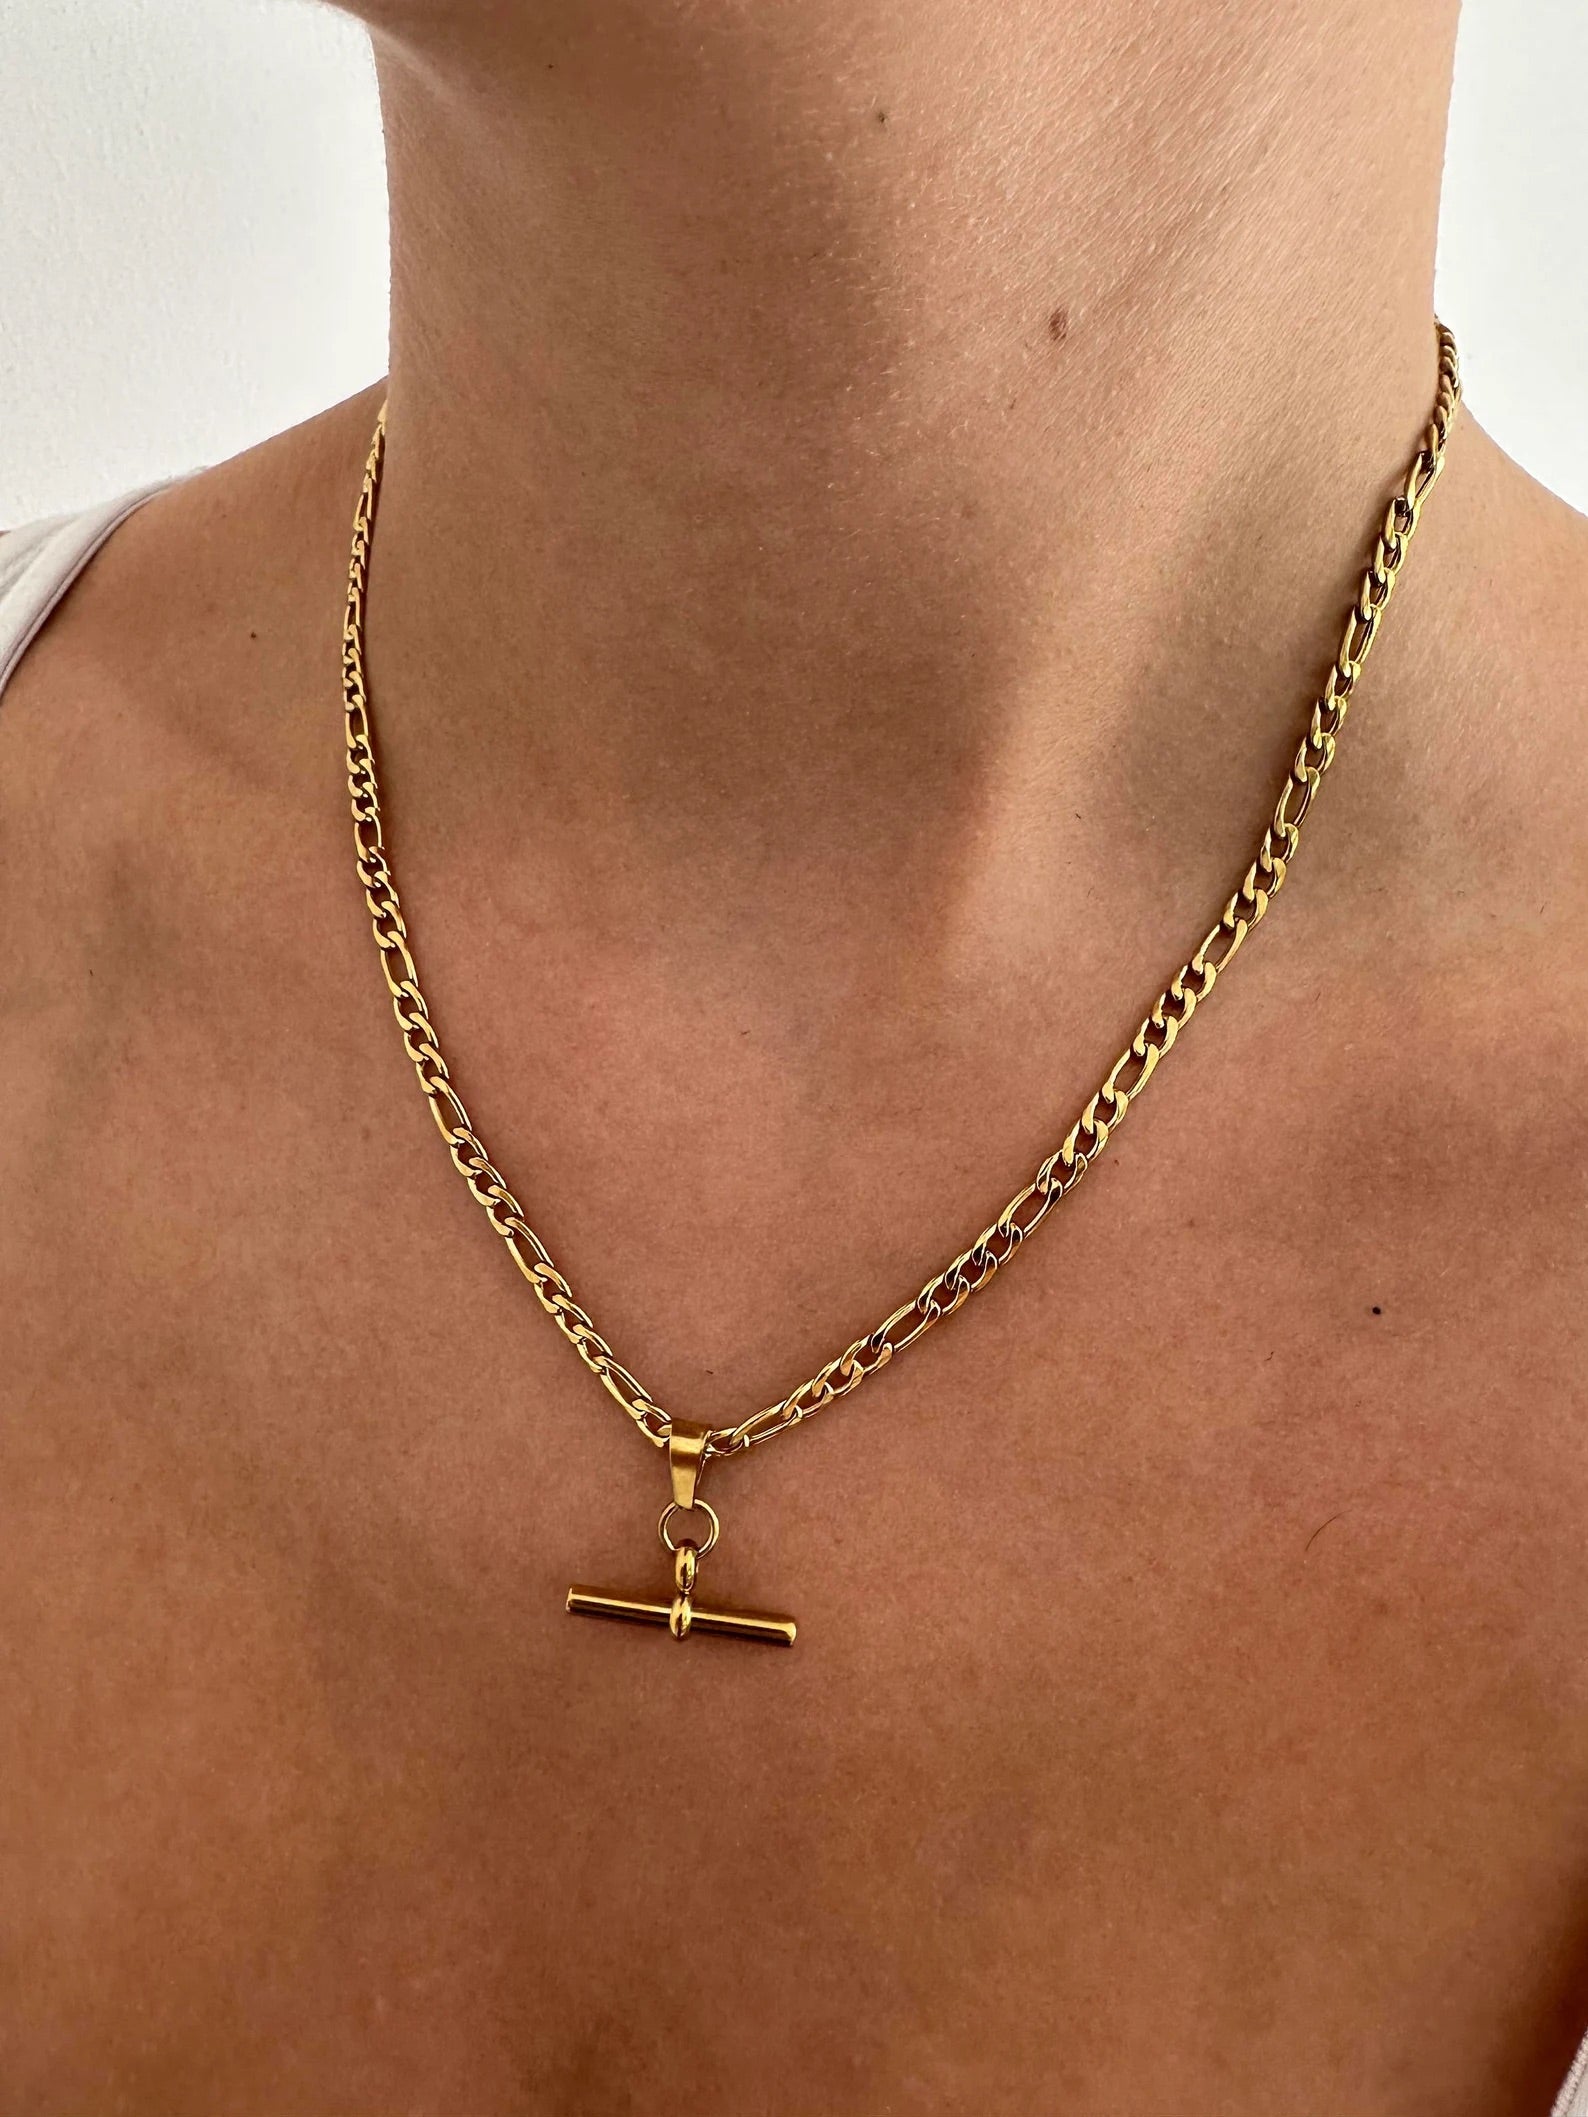 Gold T-Bar Necklace: Sophisticated Stainless Steel Jewellery for Women